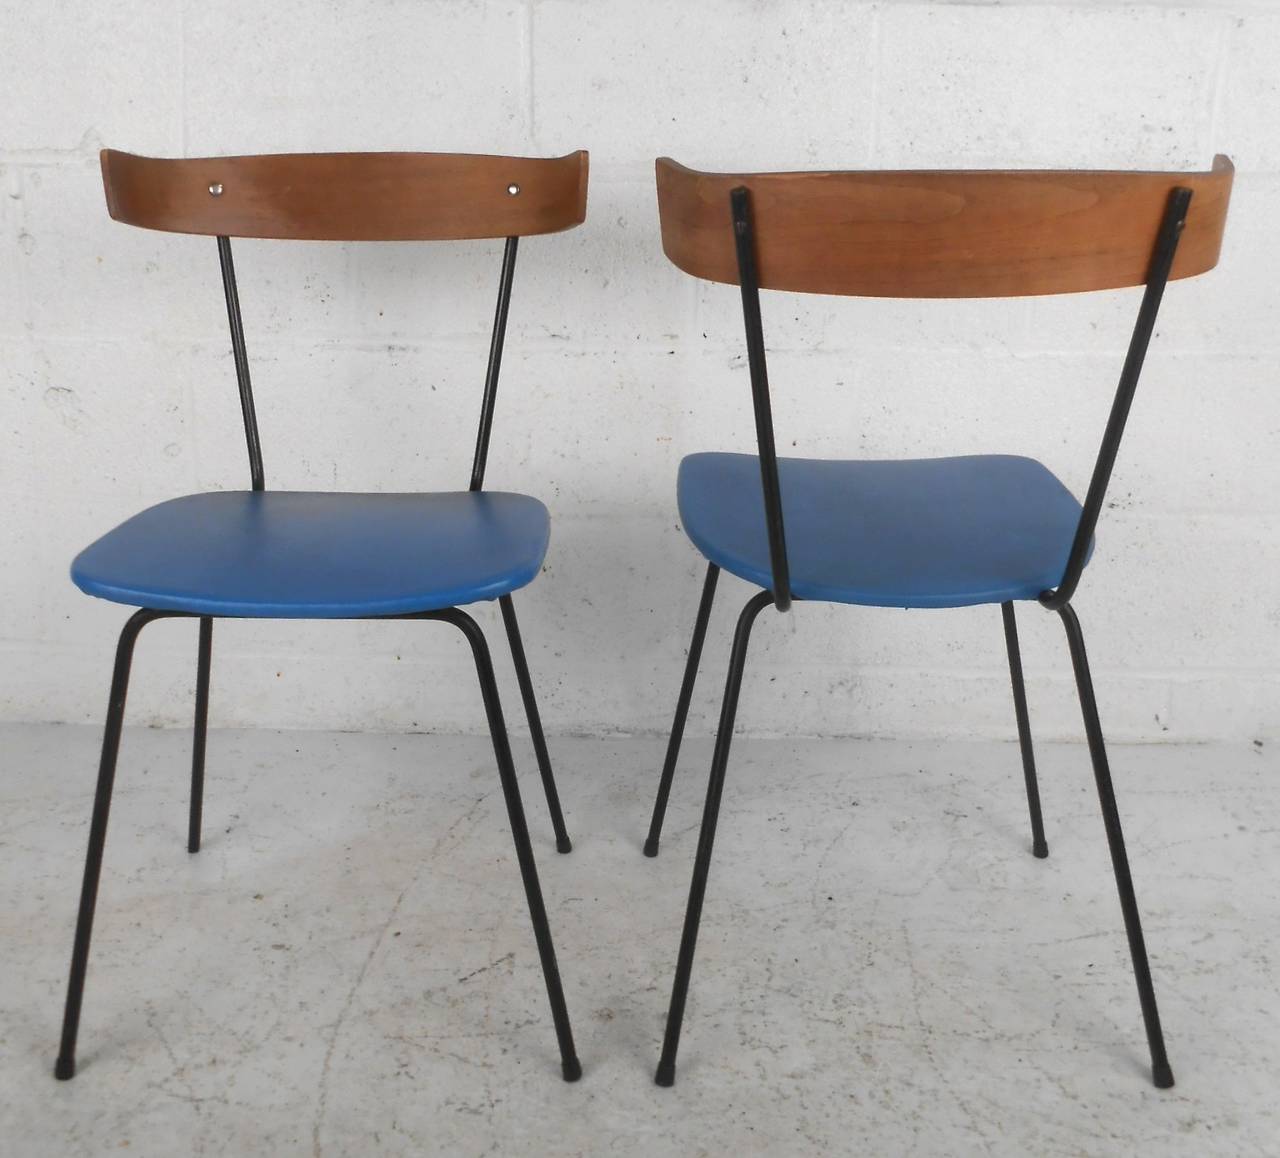 Mid-20th Century Pair of Mid-Century Modern Paul McCobb Attributed Bentwood Dining Chairs